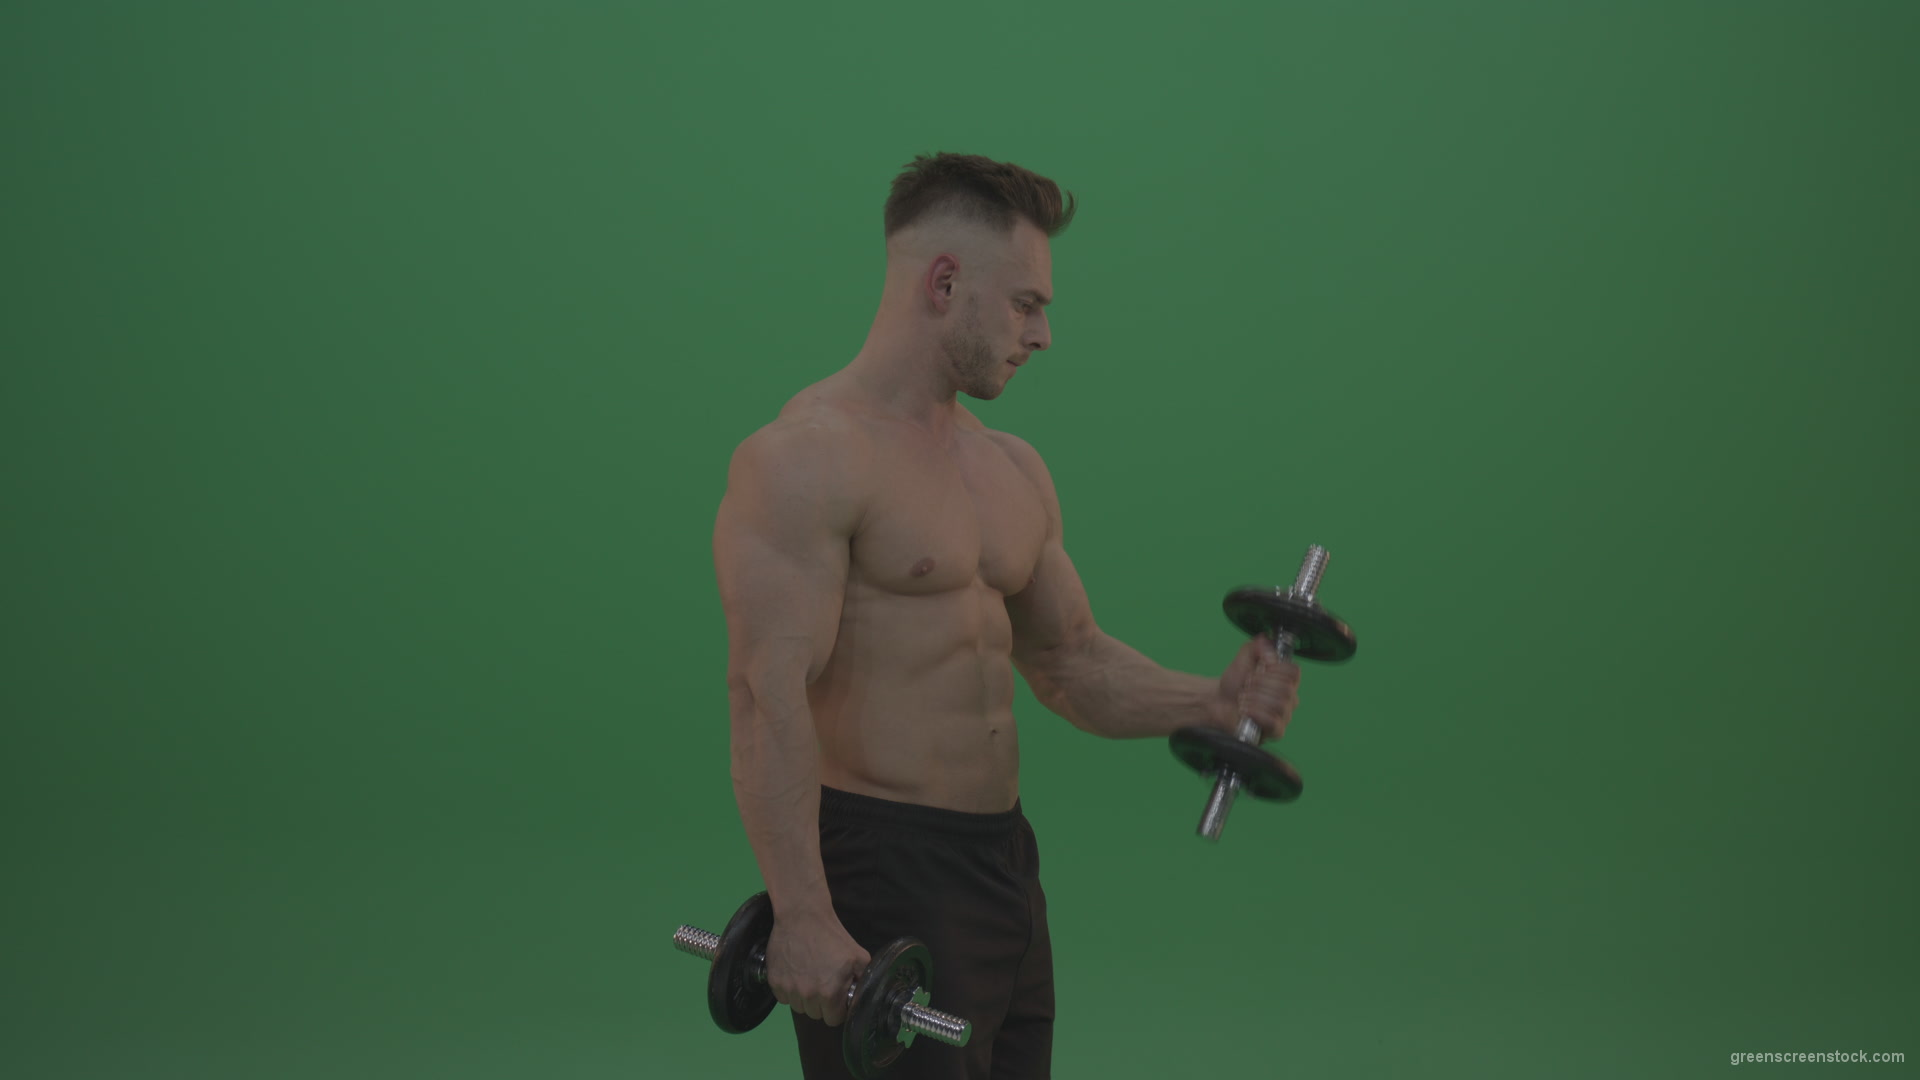 Young_Bodybuilder_Working_Out_Two_Handed_Dumbbell_Push_Ups_Excercise_On_Green_Screen_Wall_Background_005 Green Screen Stock